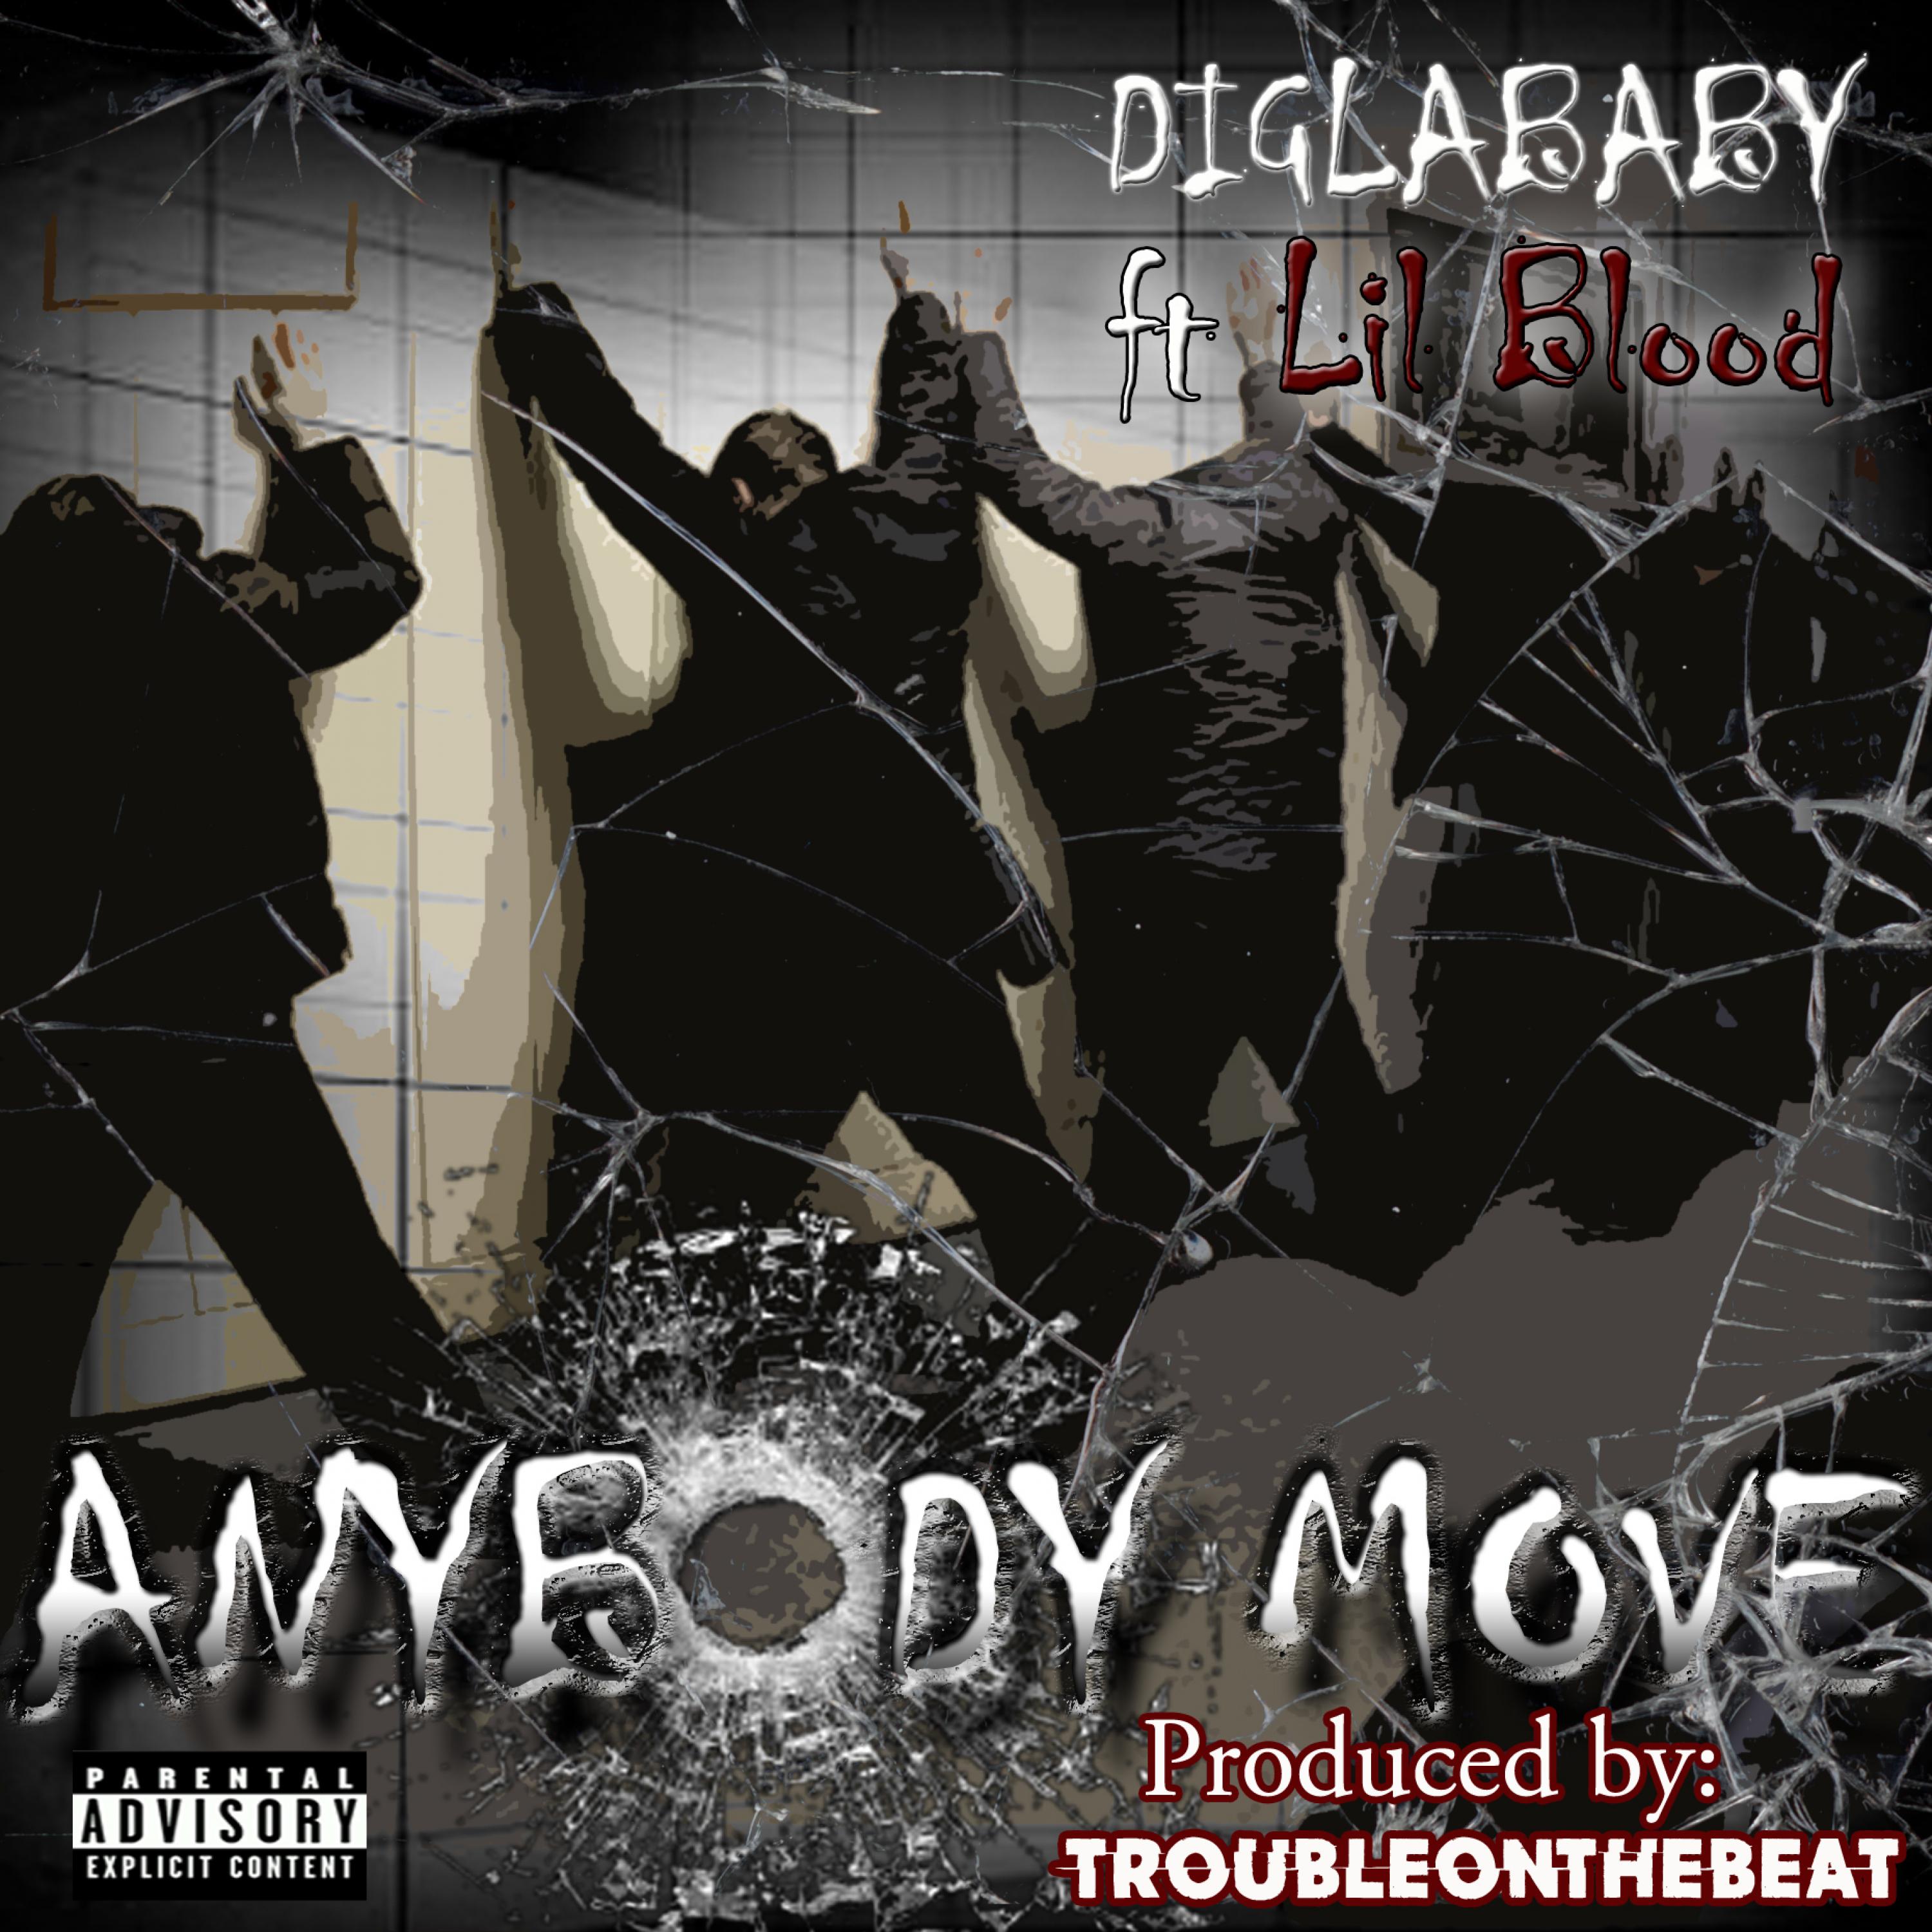 Anybody Move (feat. Lil Blood)